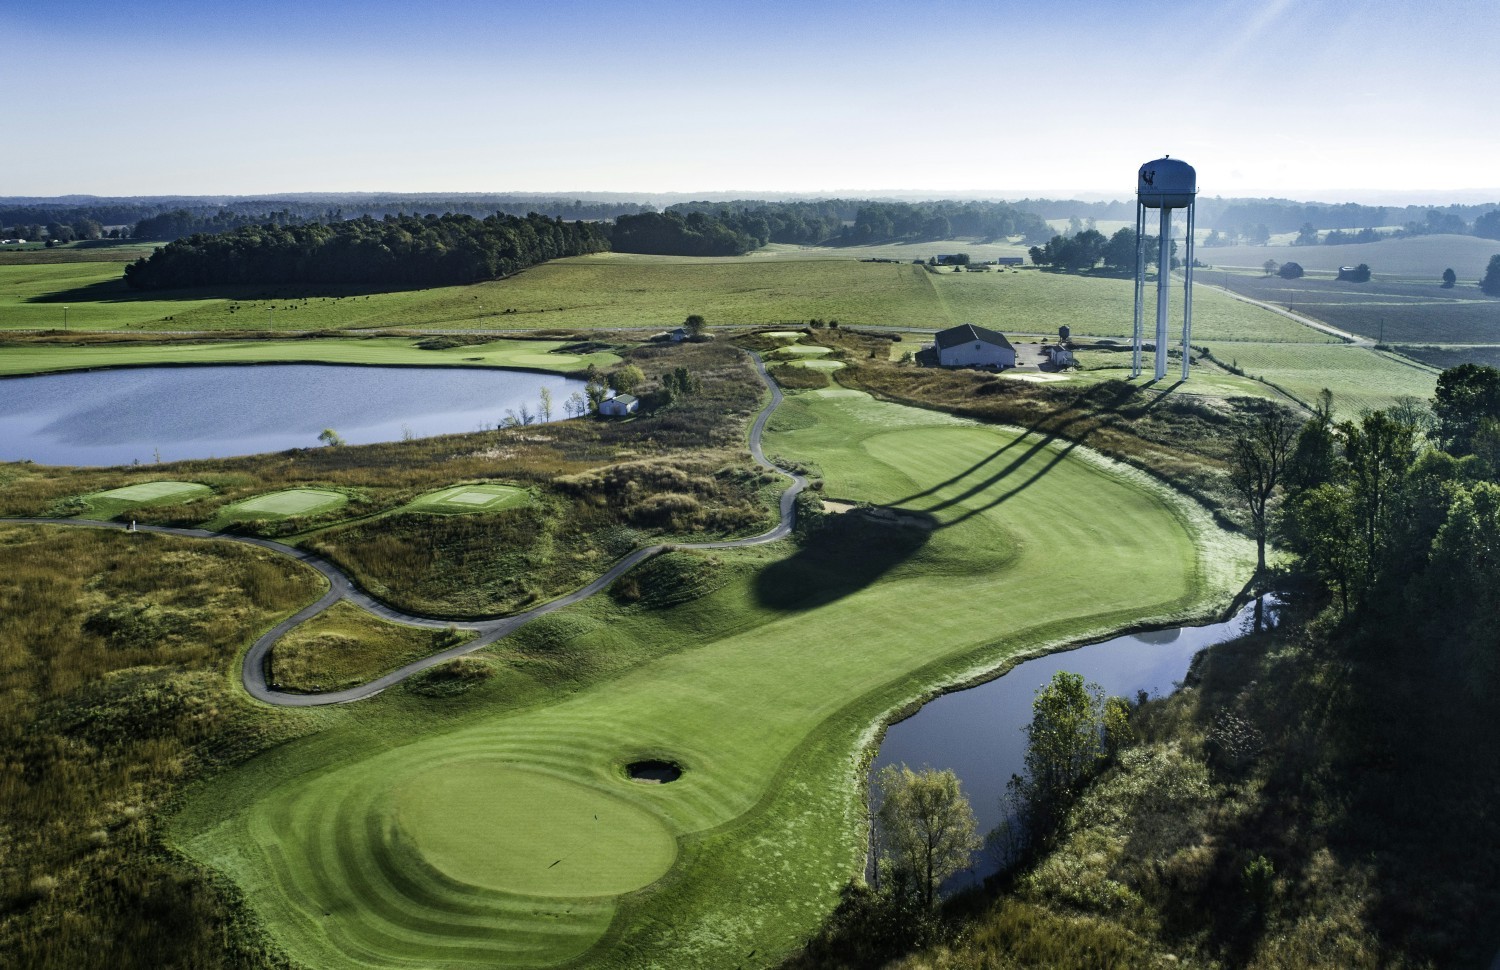 A view of Chariot Run Golf Course's astonishing bentgrass fairways and greens, sparkling lakes, and beautiful trees. 